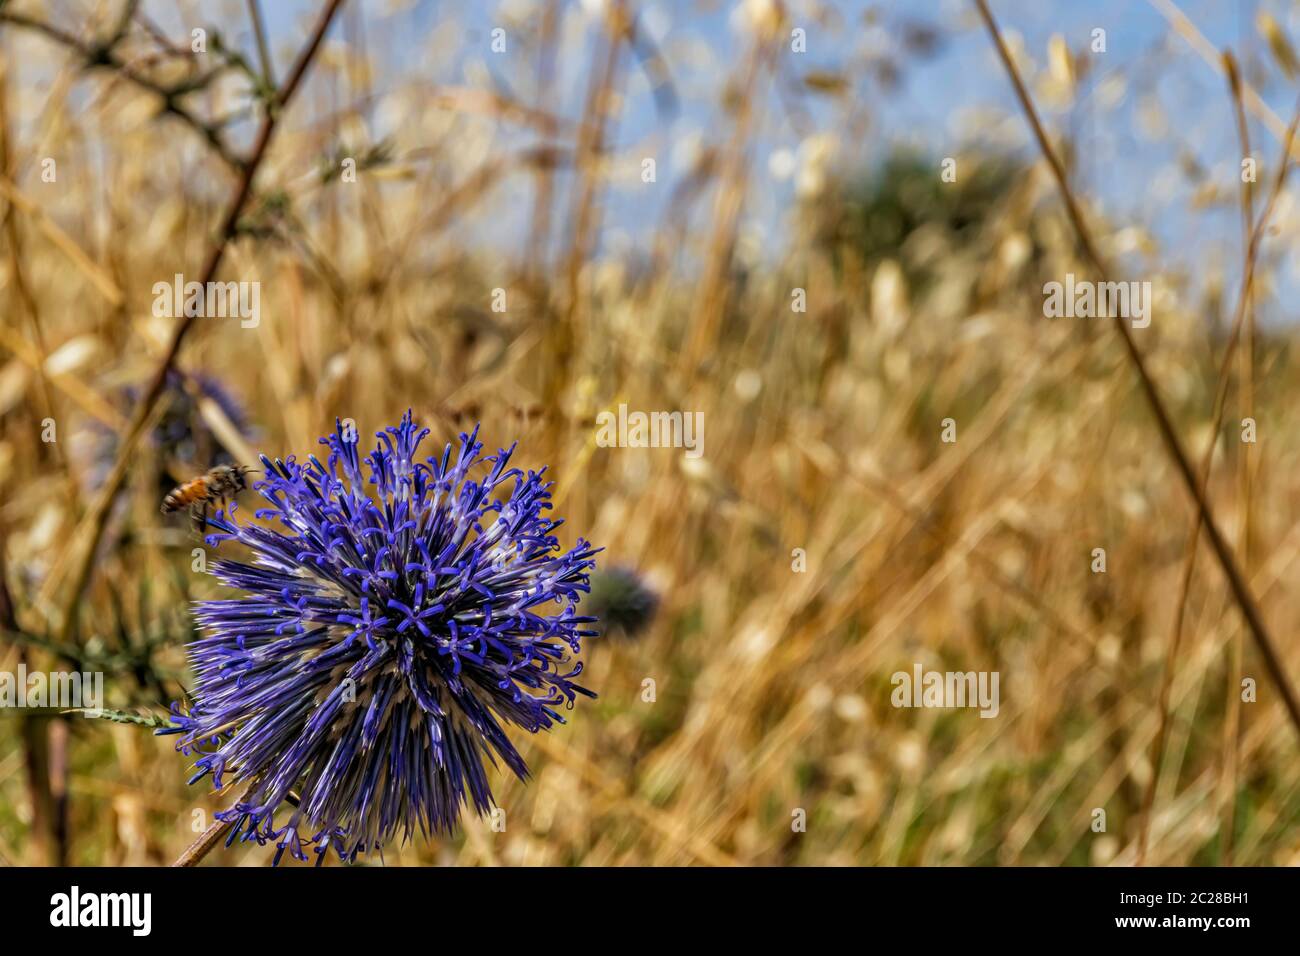 Violet Echinops bannaticus flower with bee over close up on yellow dry grass background Stock Photo